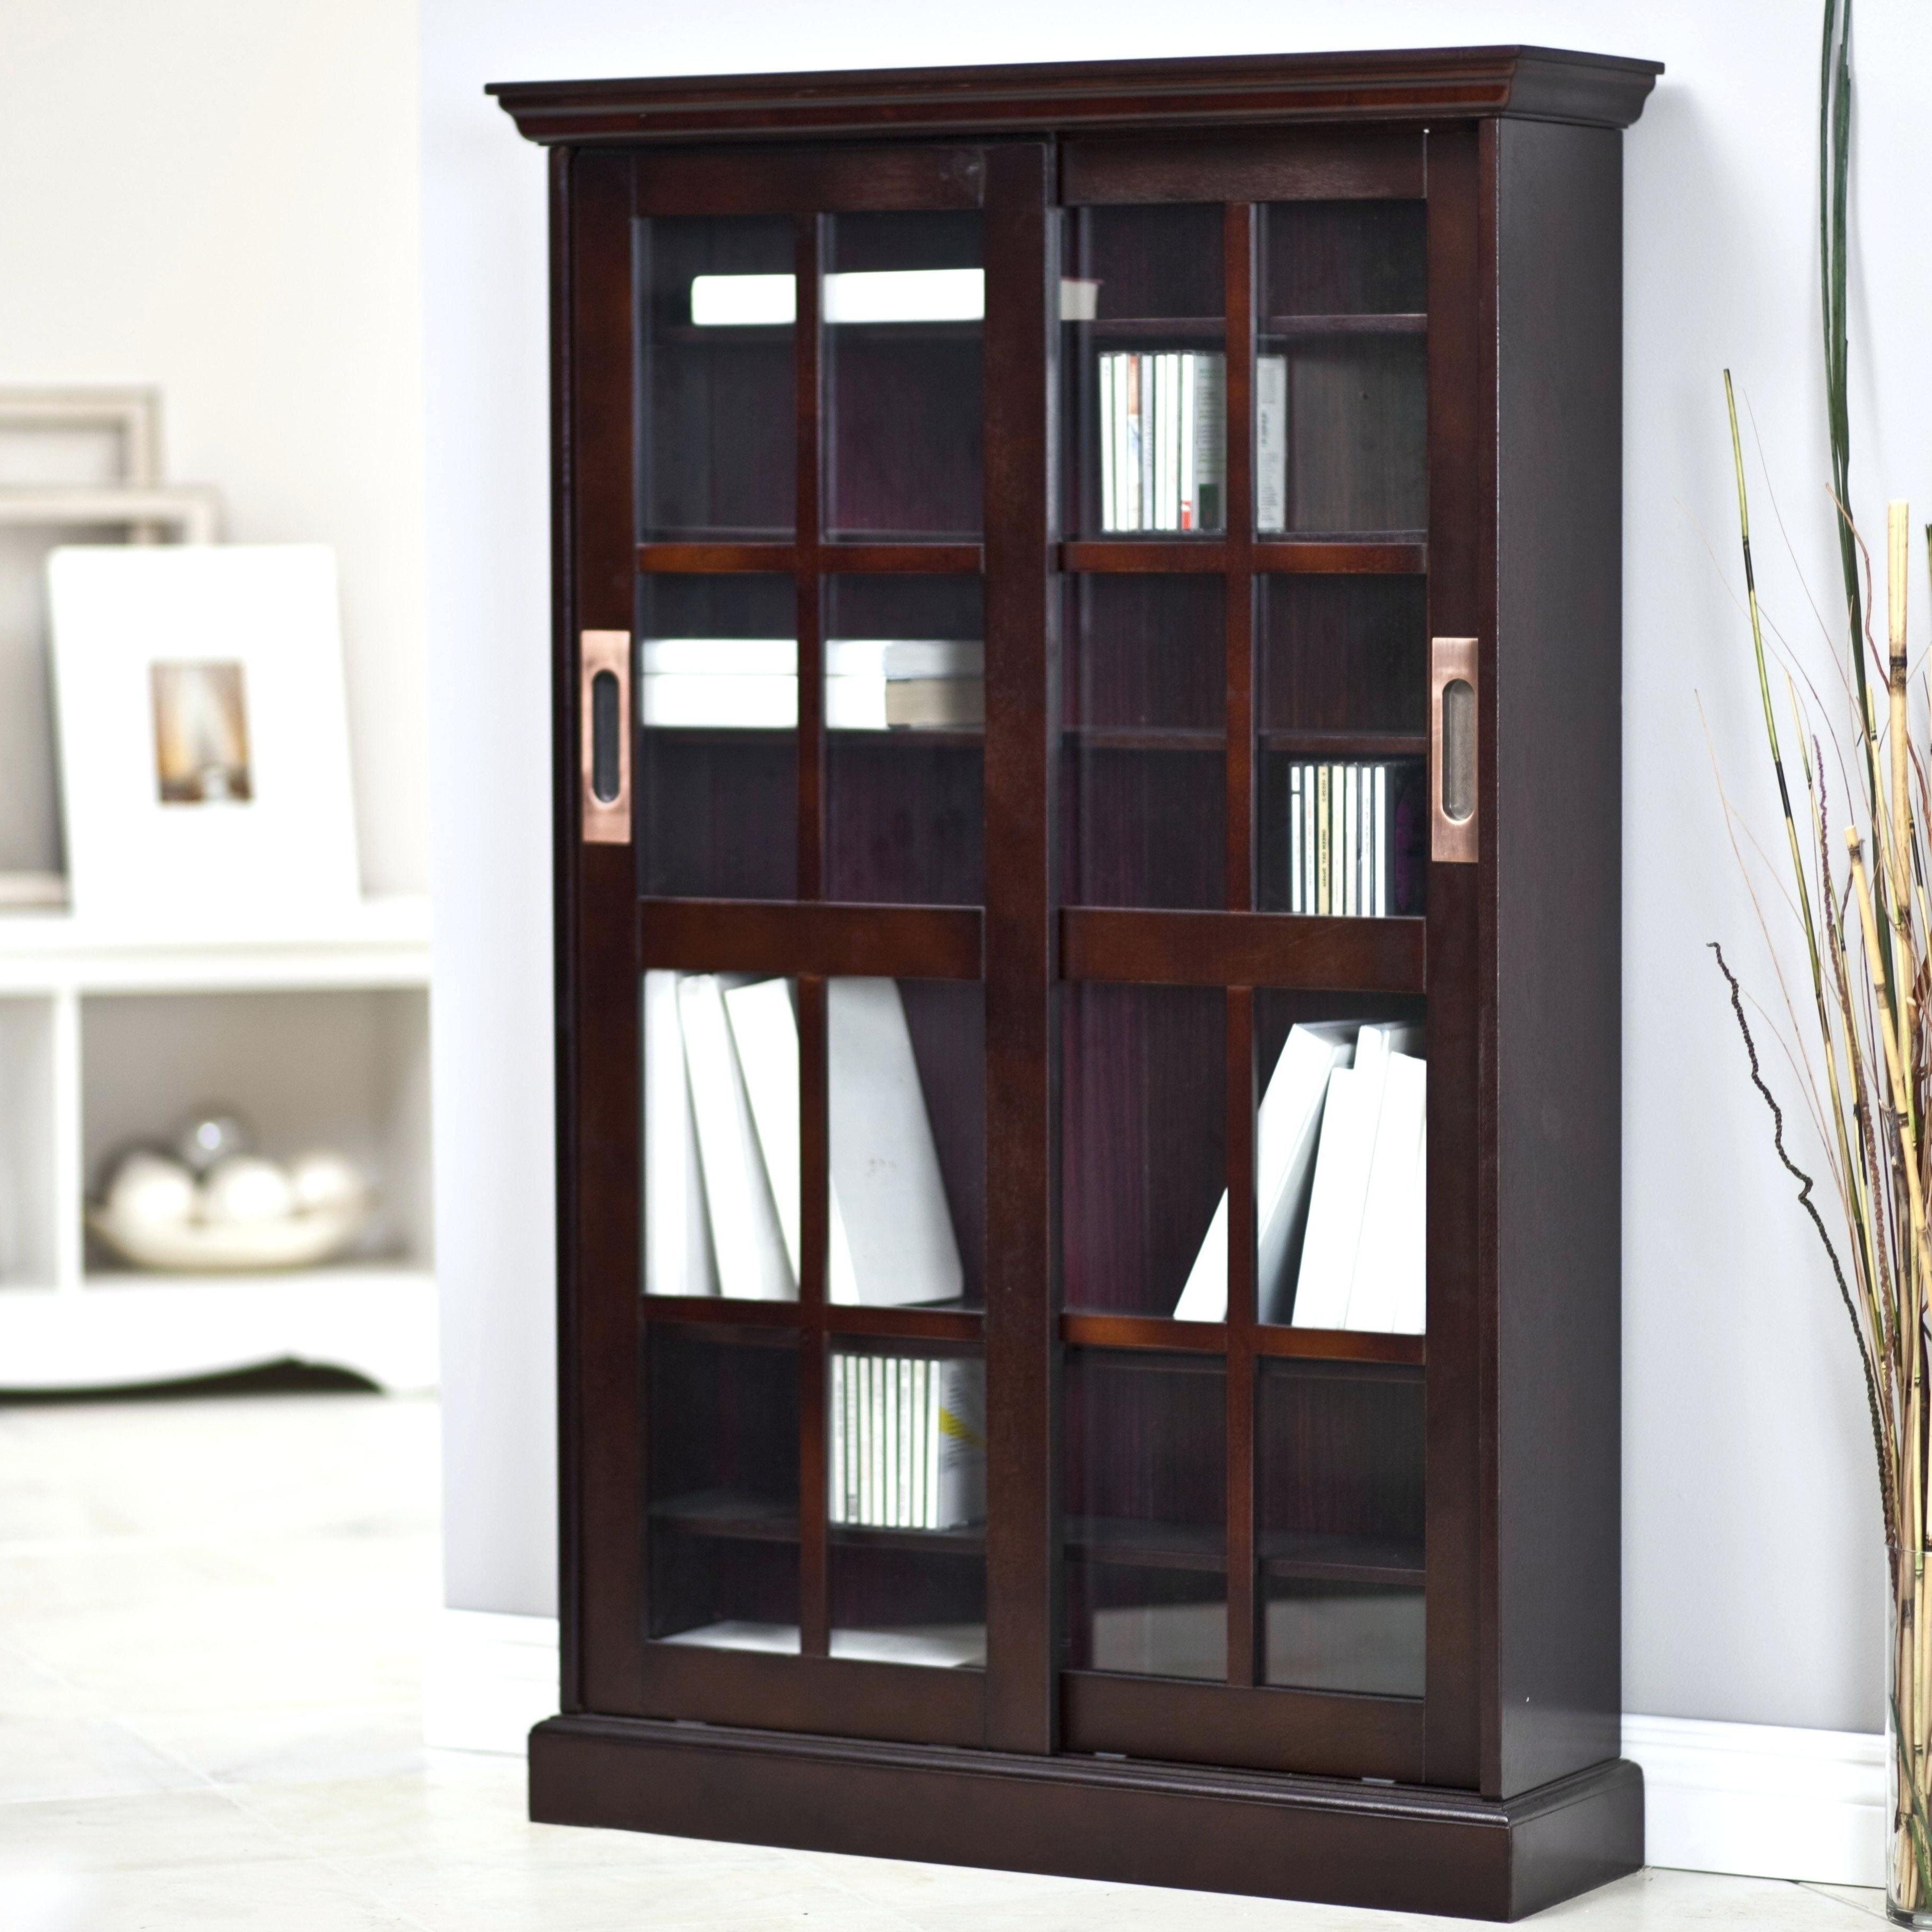 Most Recently Released Bookcases With Sliding Glass Doors With Regard To Decoration: Bookcase Sliding Glass Doors (View 12 of 15)